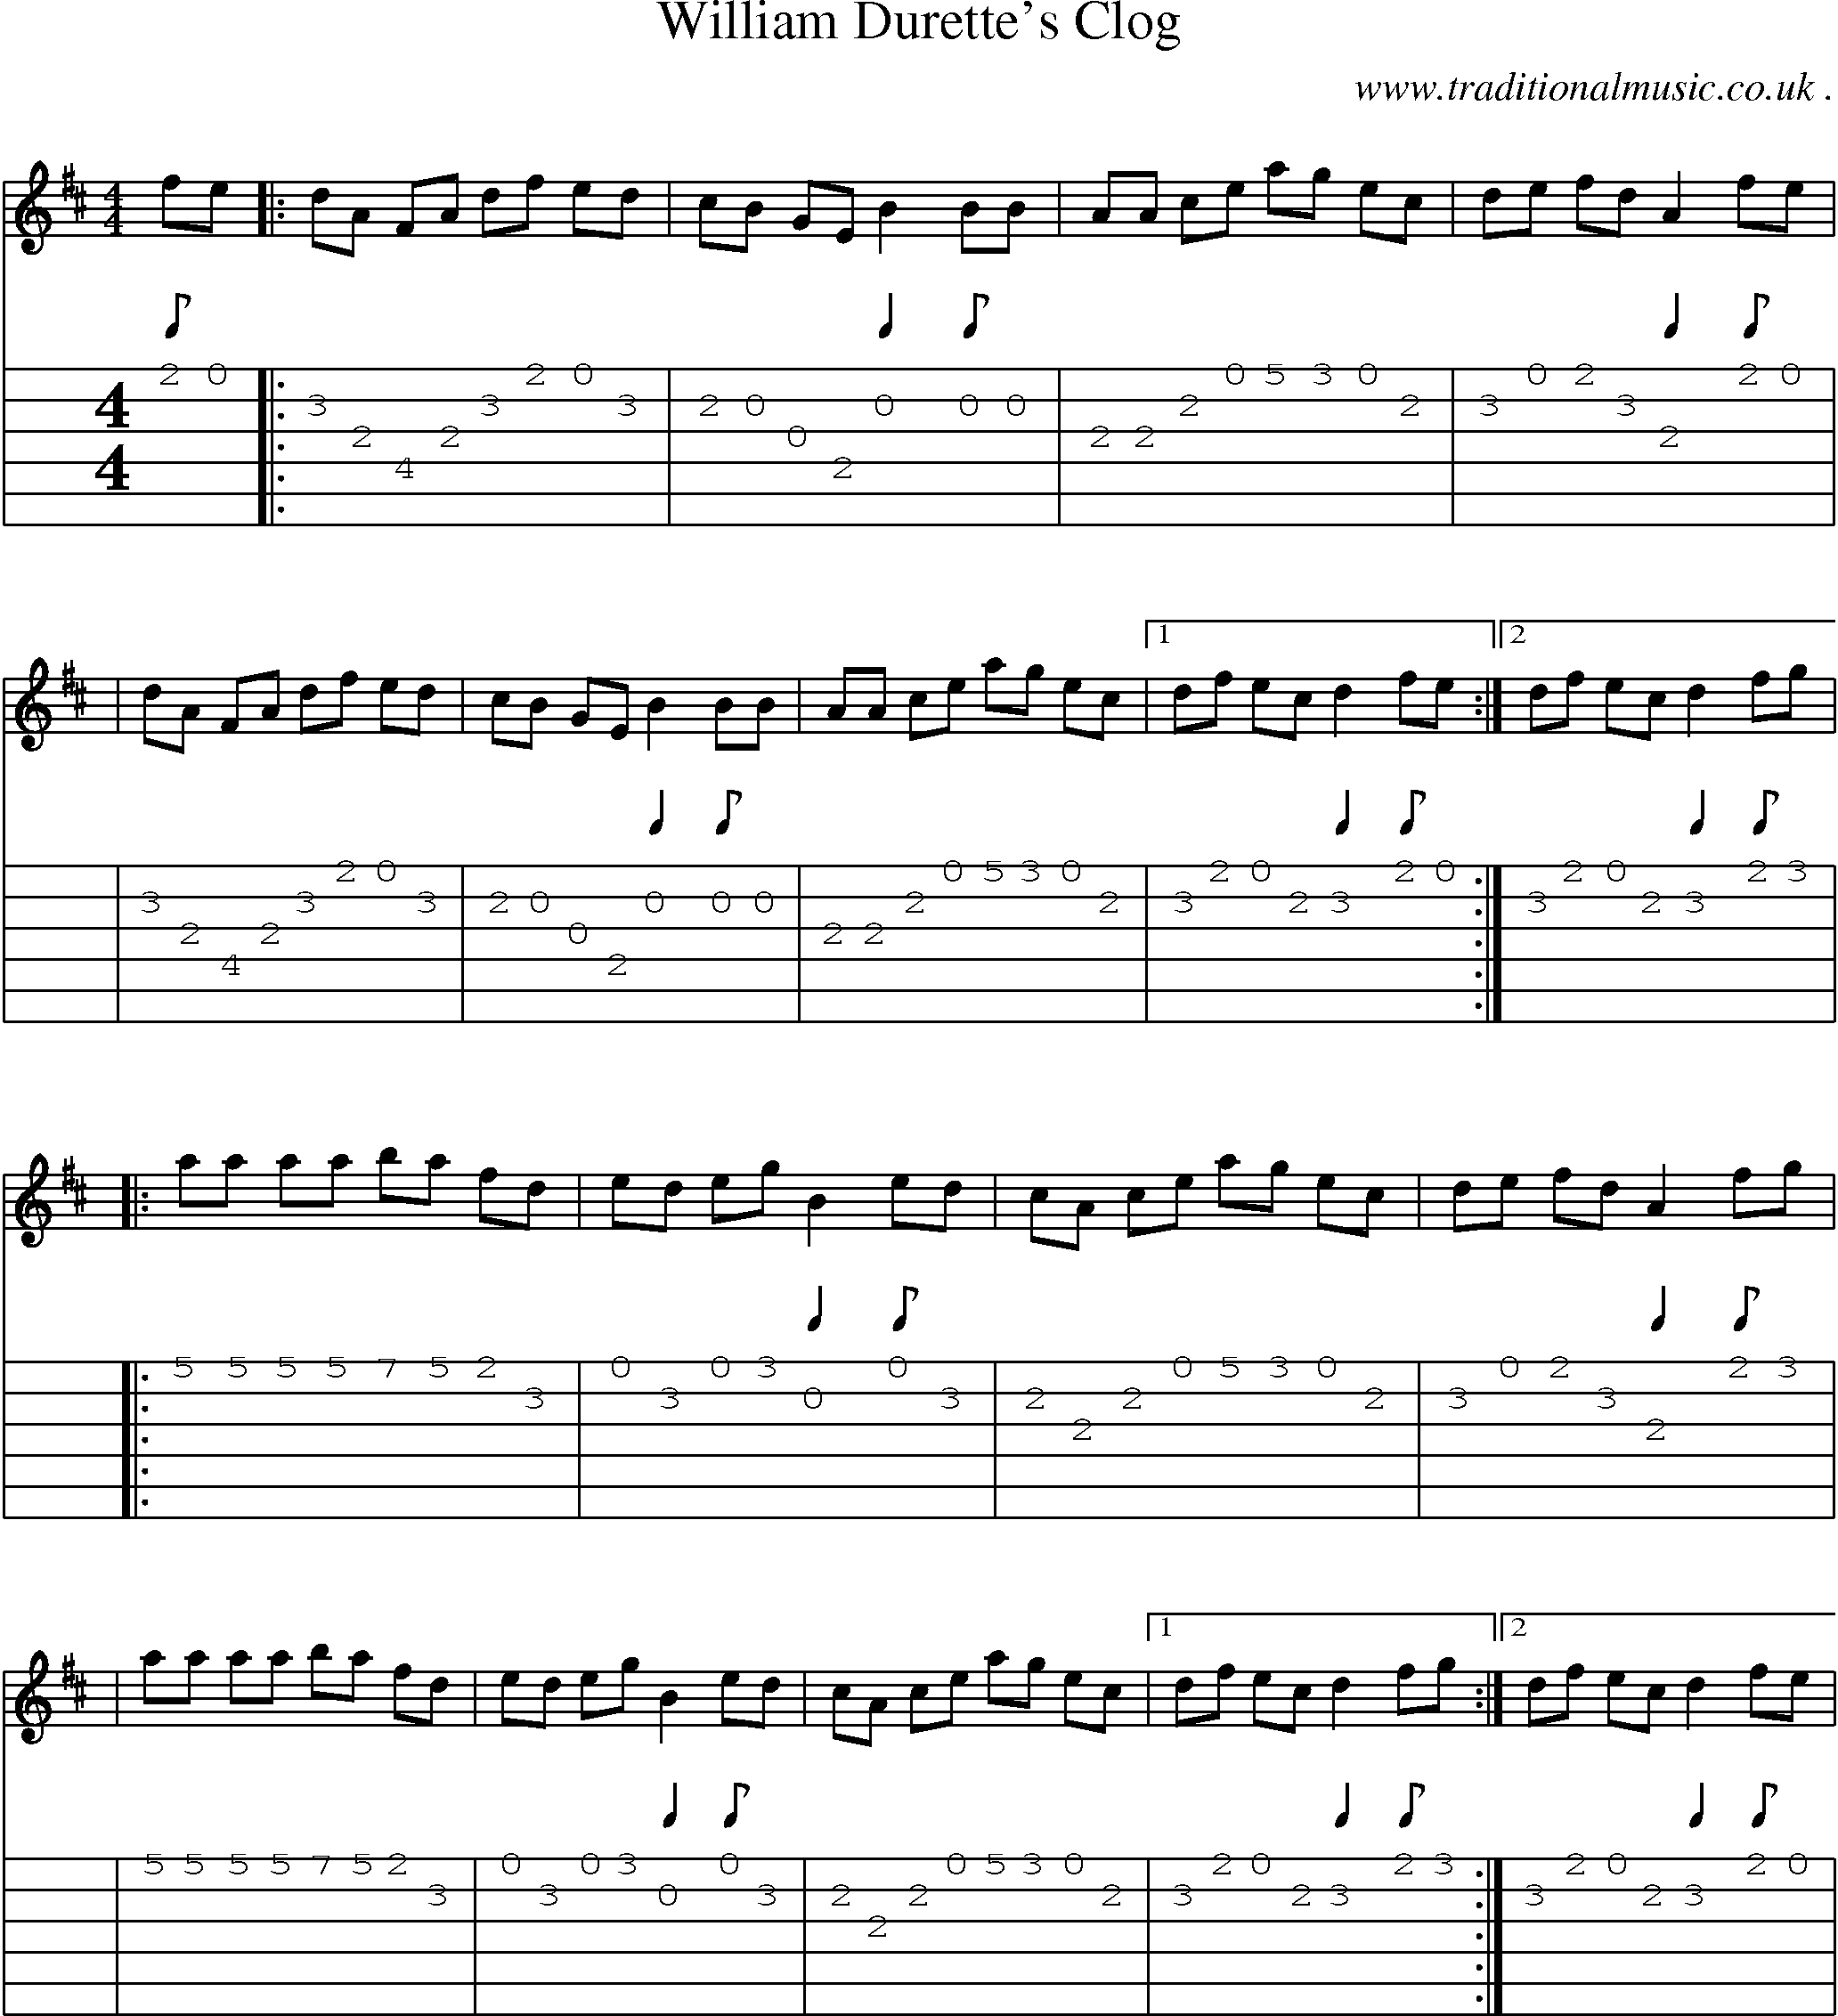 Sheet-Music and Guitar Tabs for William Durettes Clog